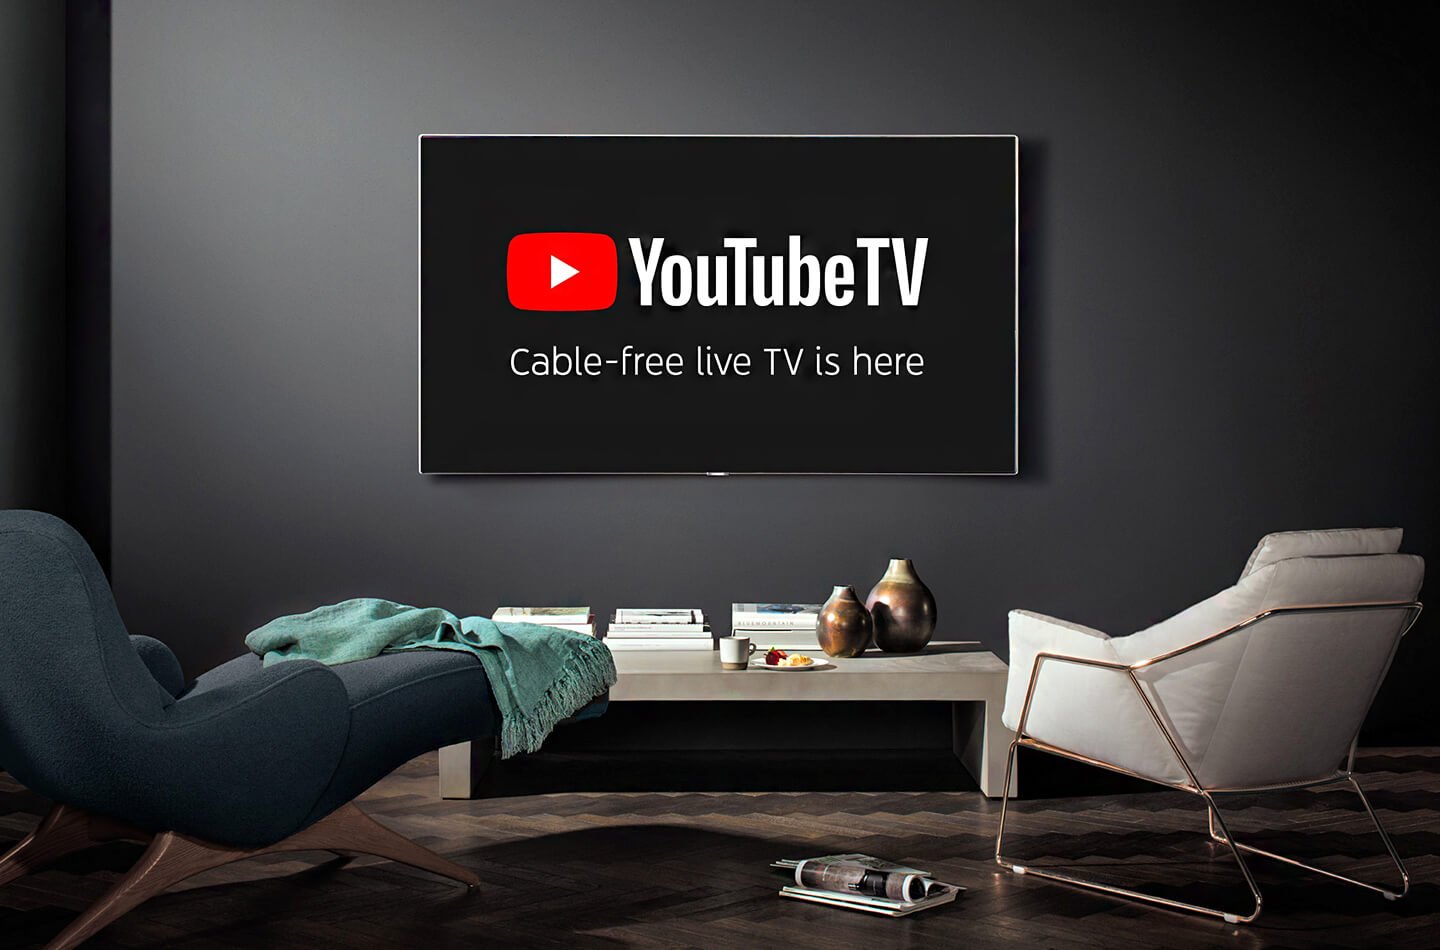 How to Watch YouTube TV on Samsung Smart TV